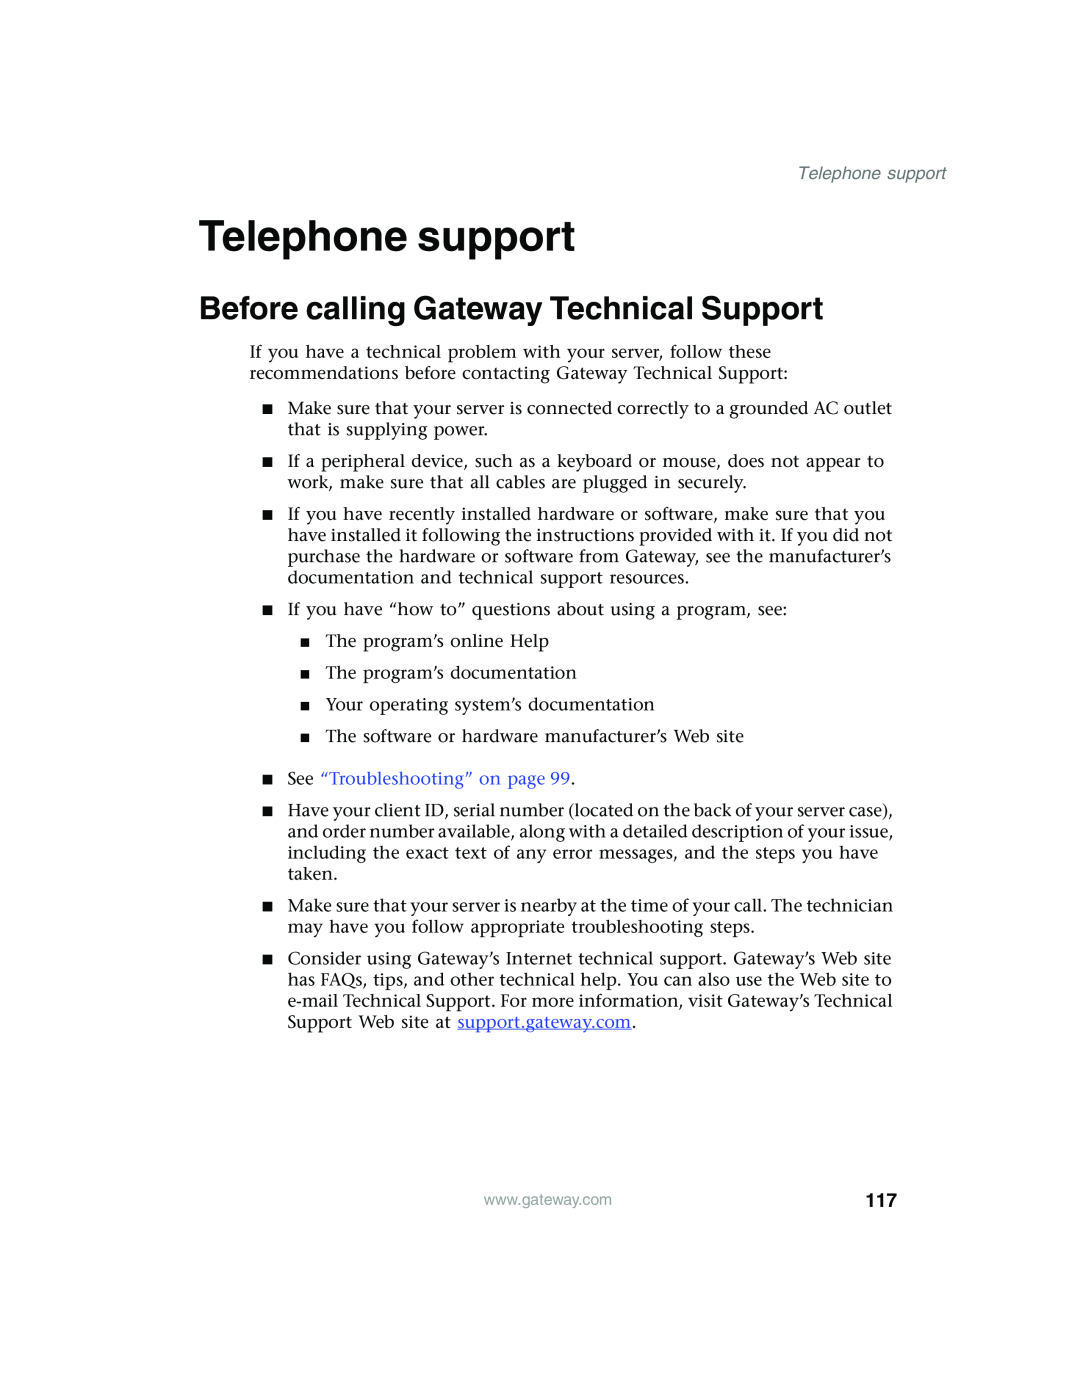 Gateway 960 manual Telephone support, Before calling Gateway Technical Support, See “Troubleshooting” on page 